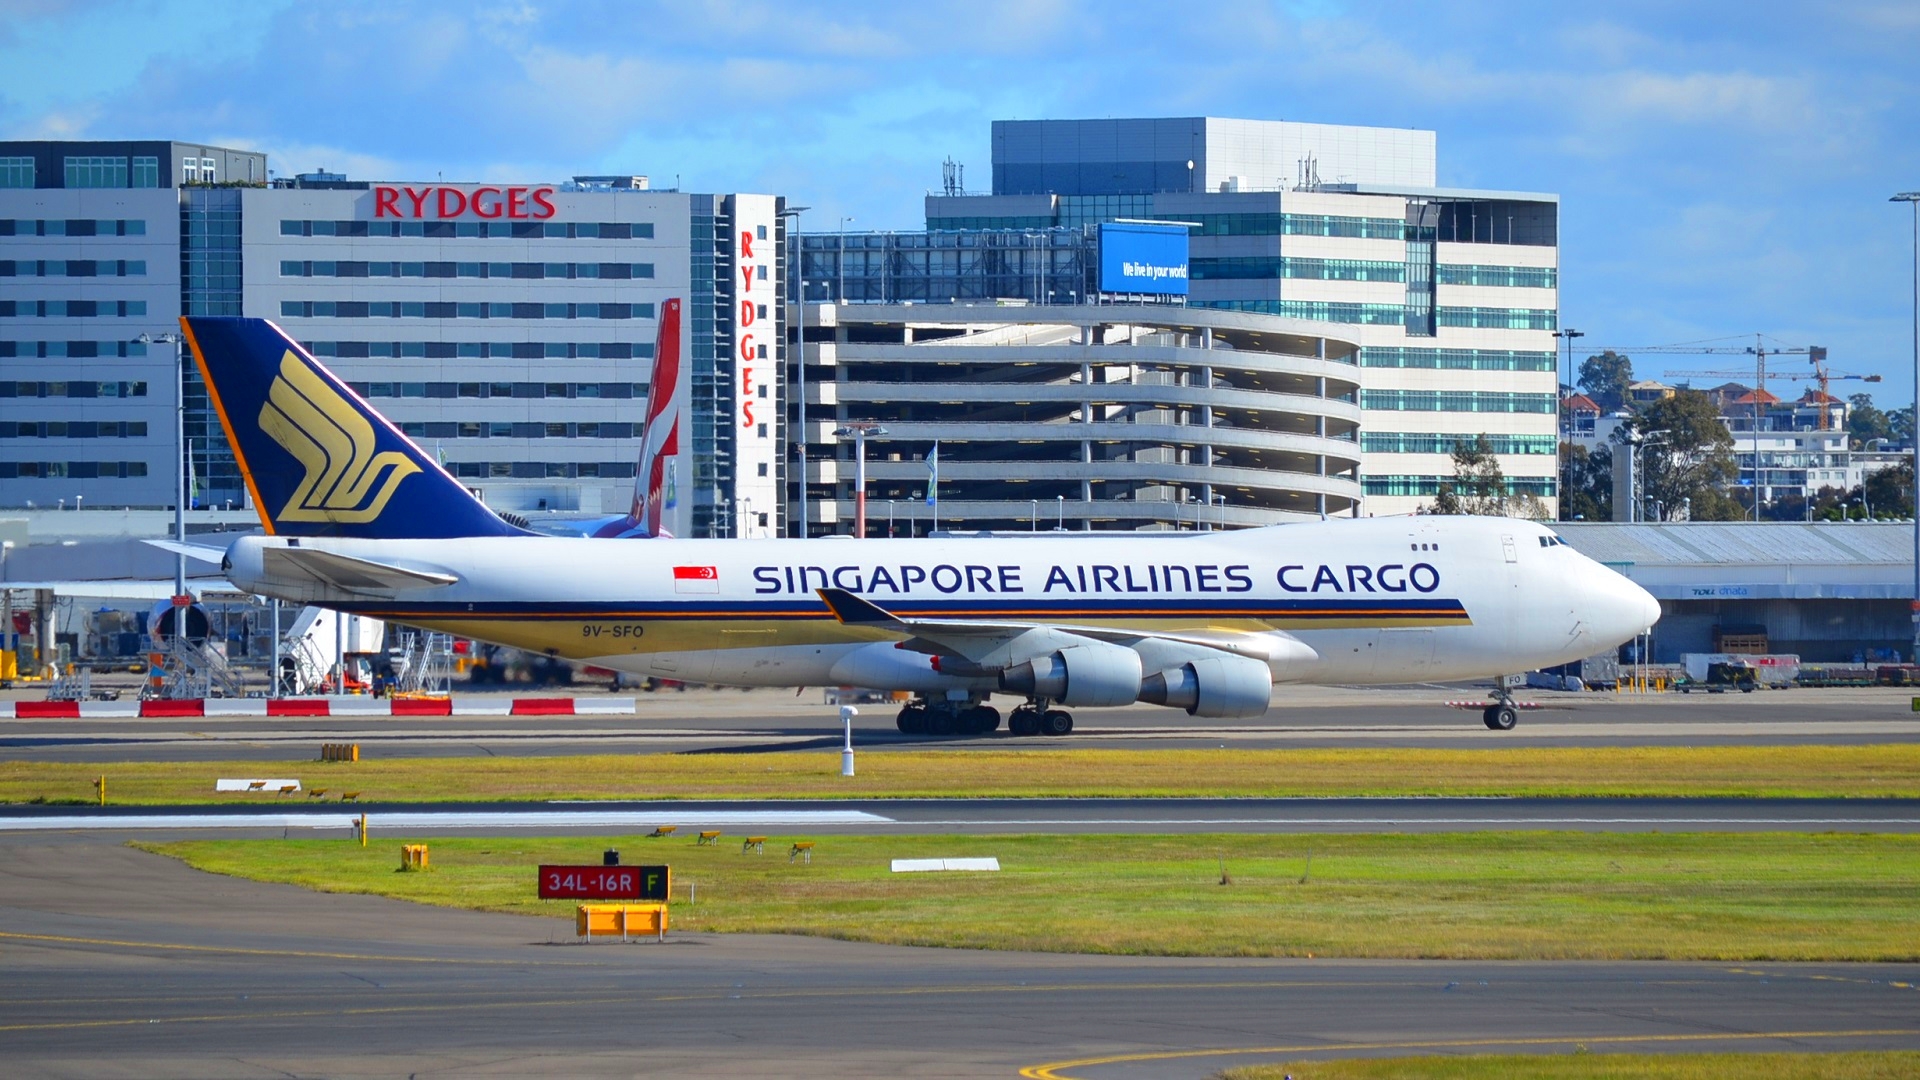 PC Wallpapers airport, boeing 747, vehicles, aircraft, airplane, boeing, cargo plane, sydney